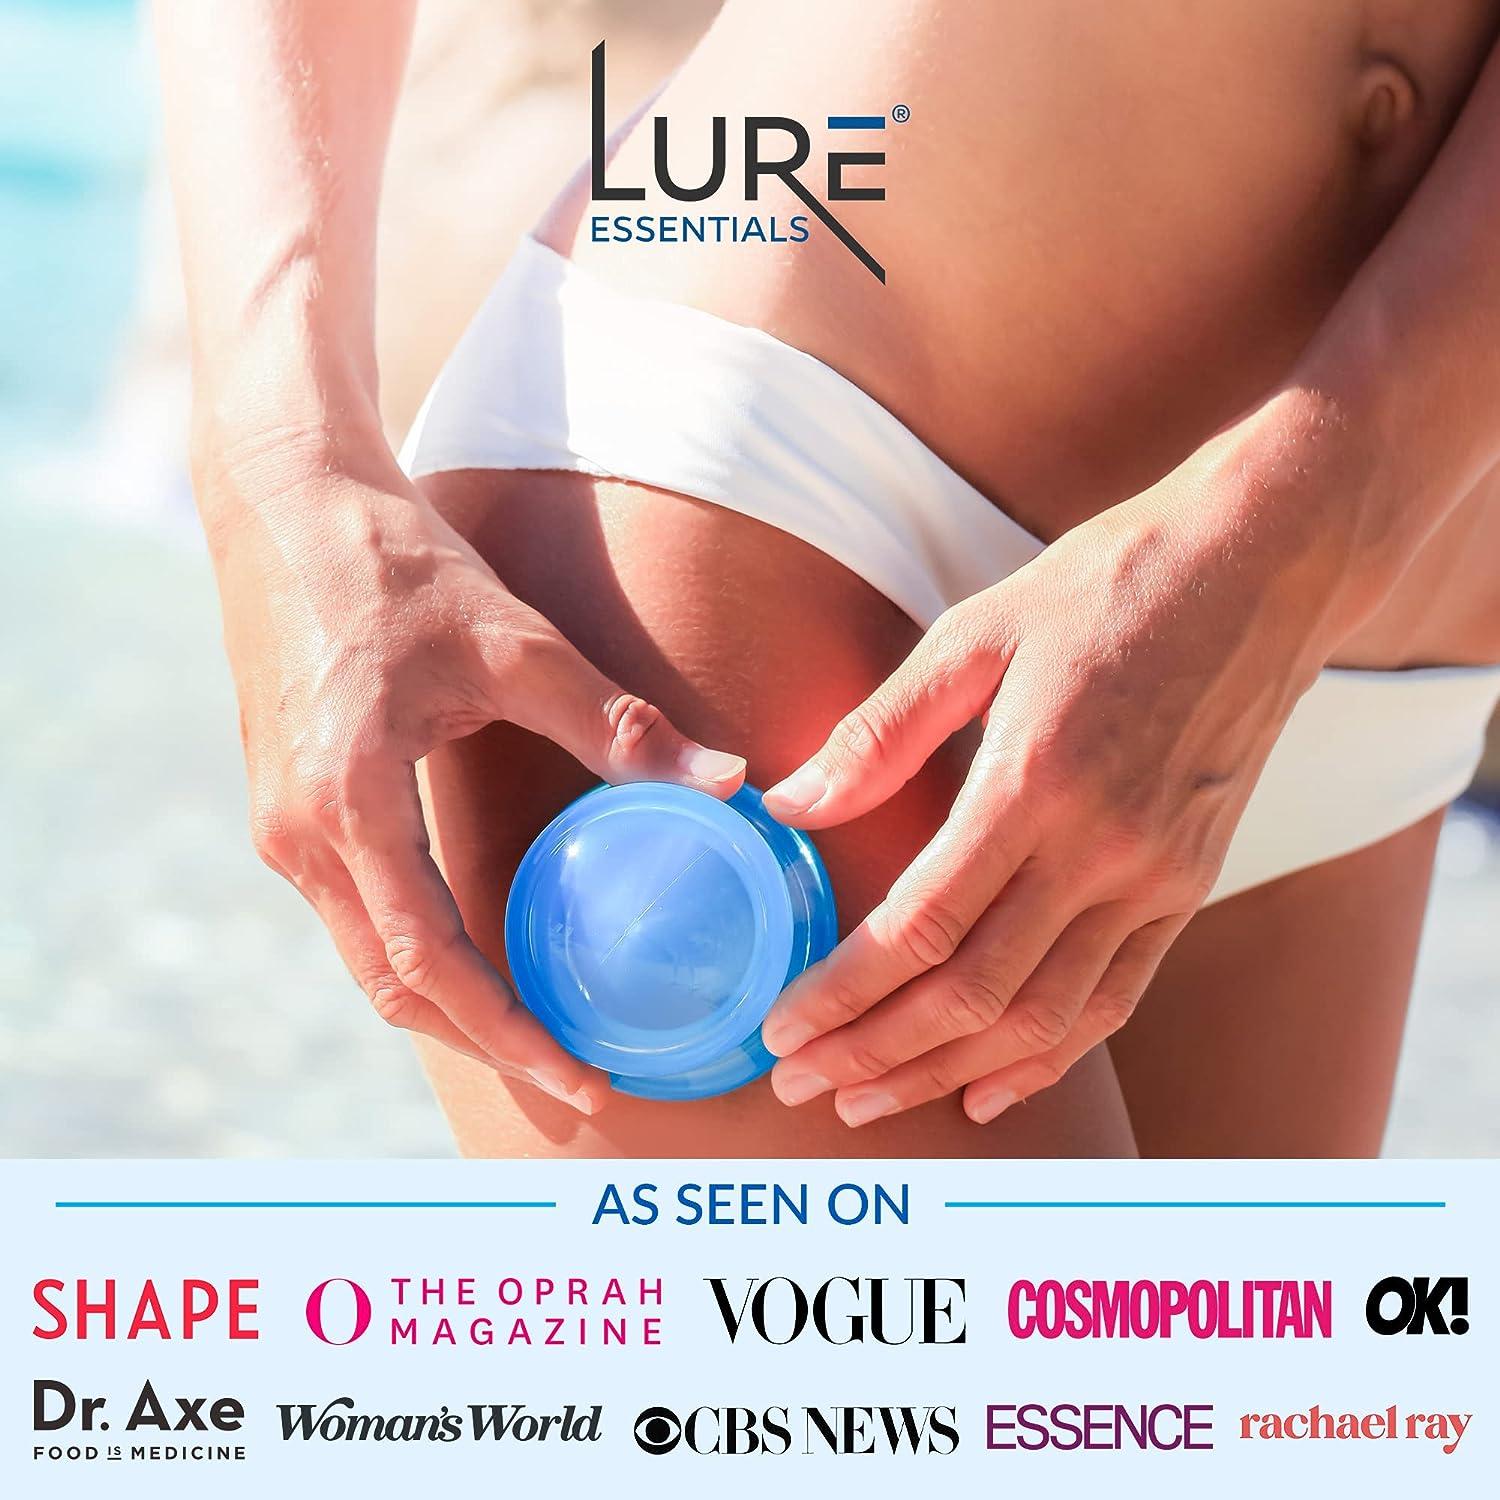 LURE Essentials Sculpt Cupping Set for Cellulite Lymphatic